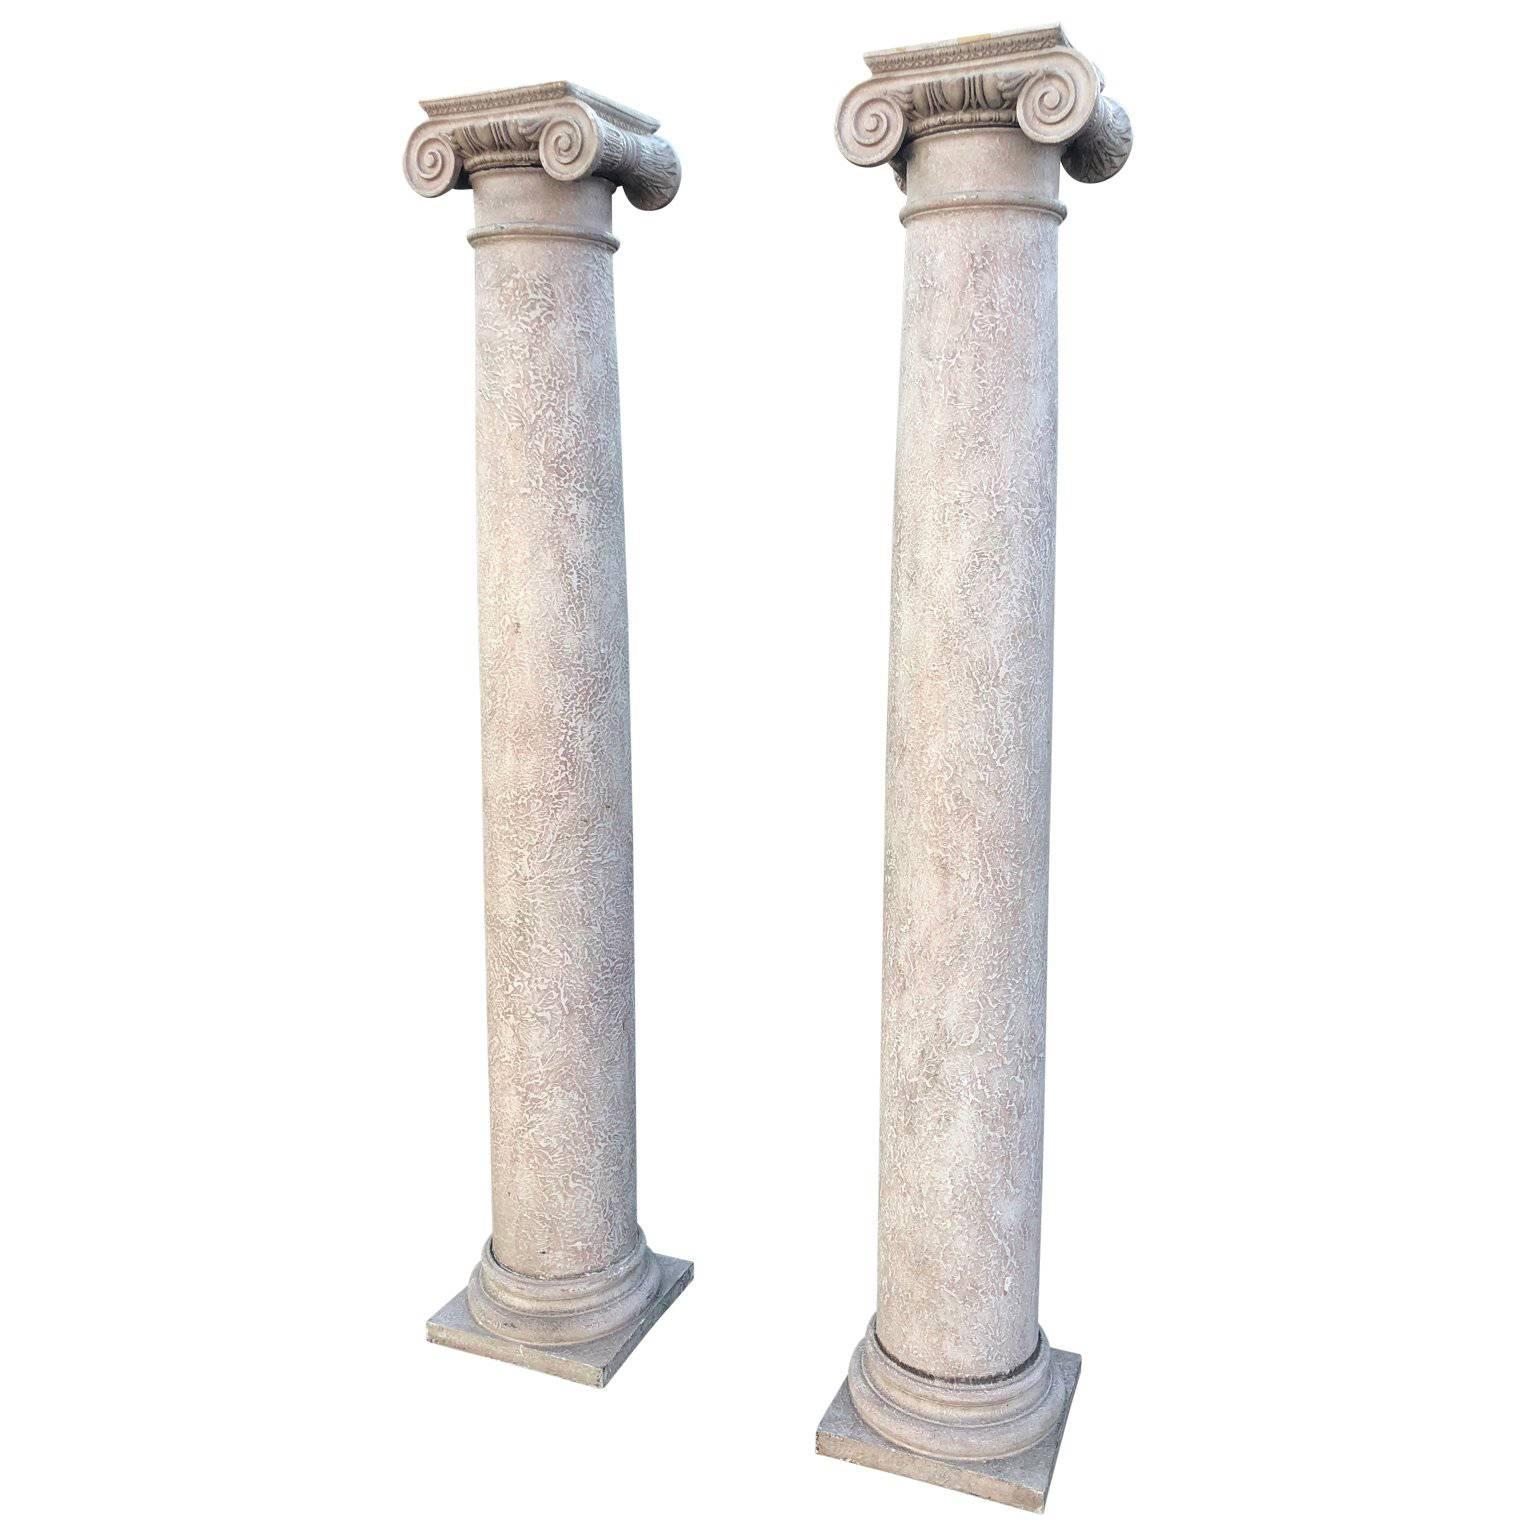 Pair of Tall Architectural Ionic-Order Columns